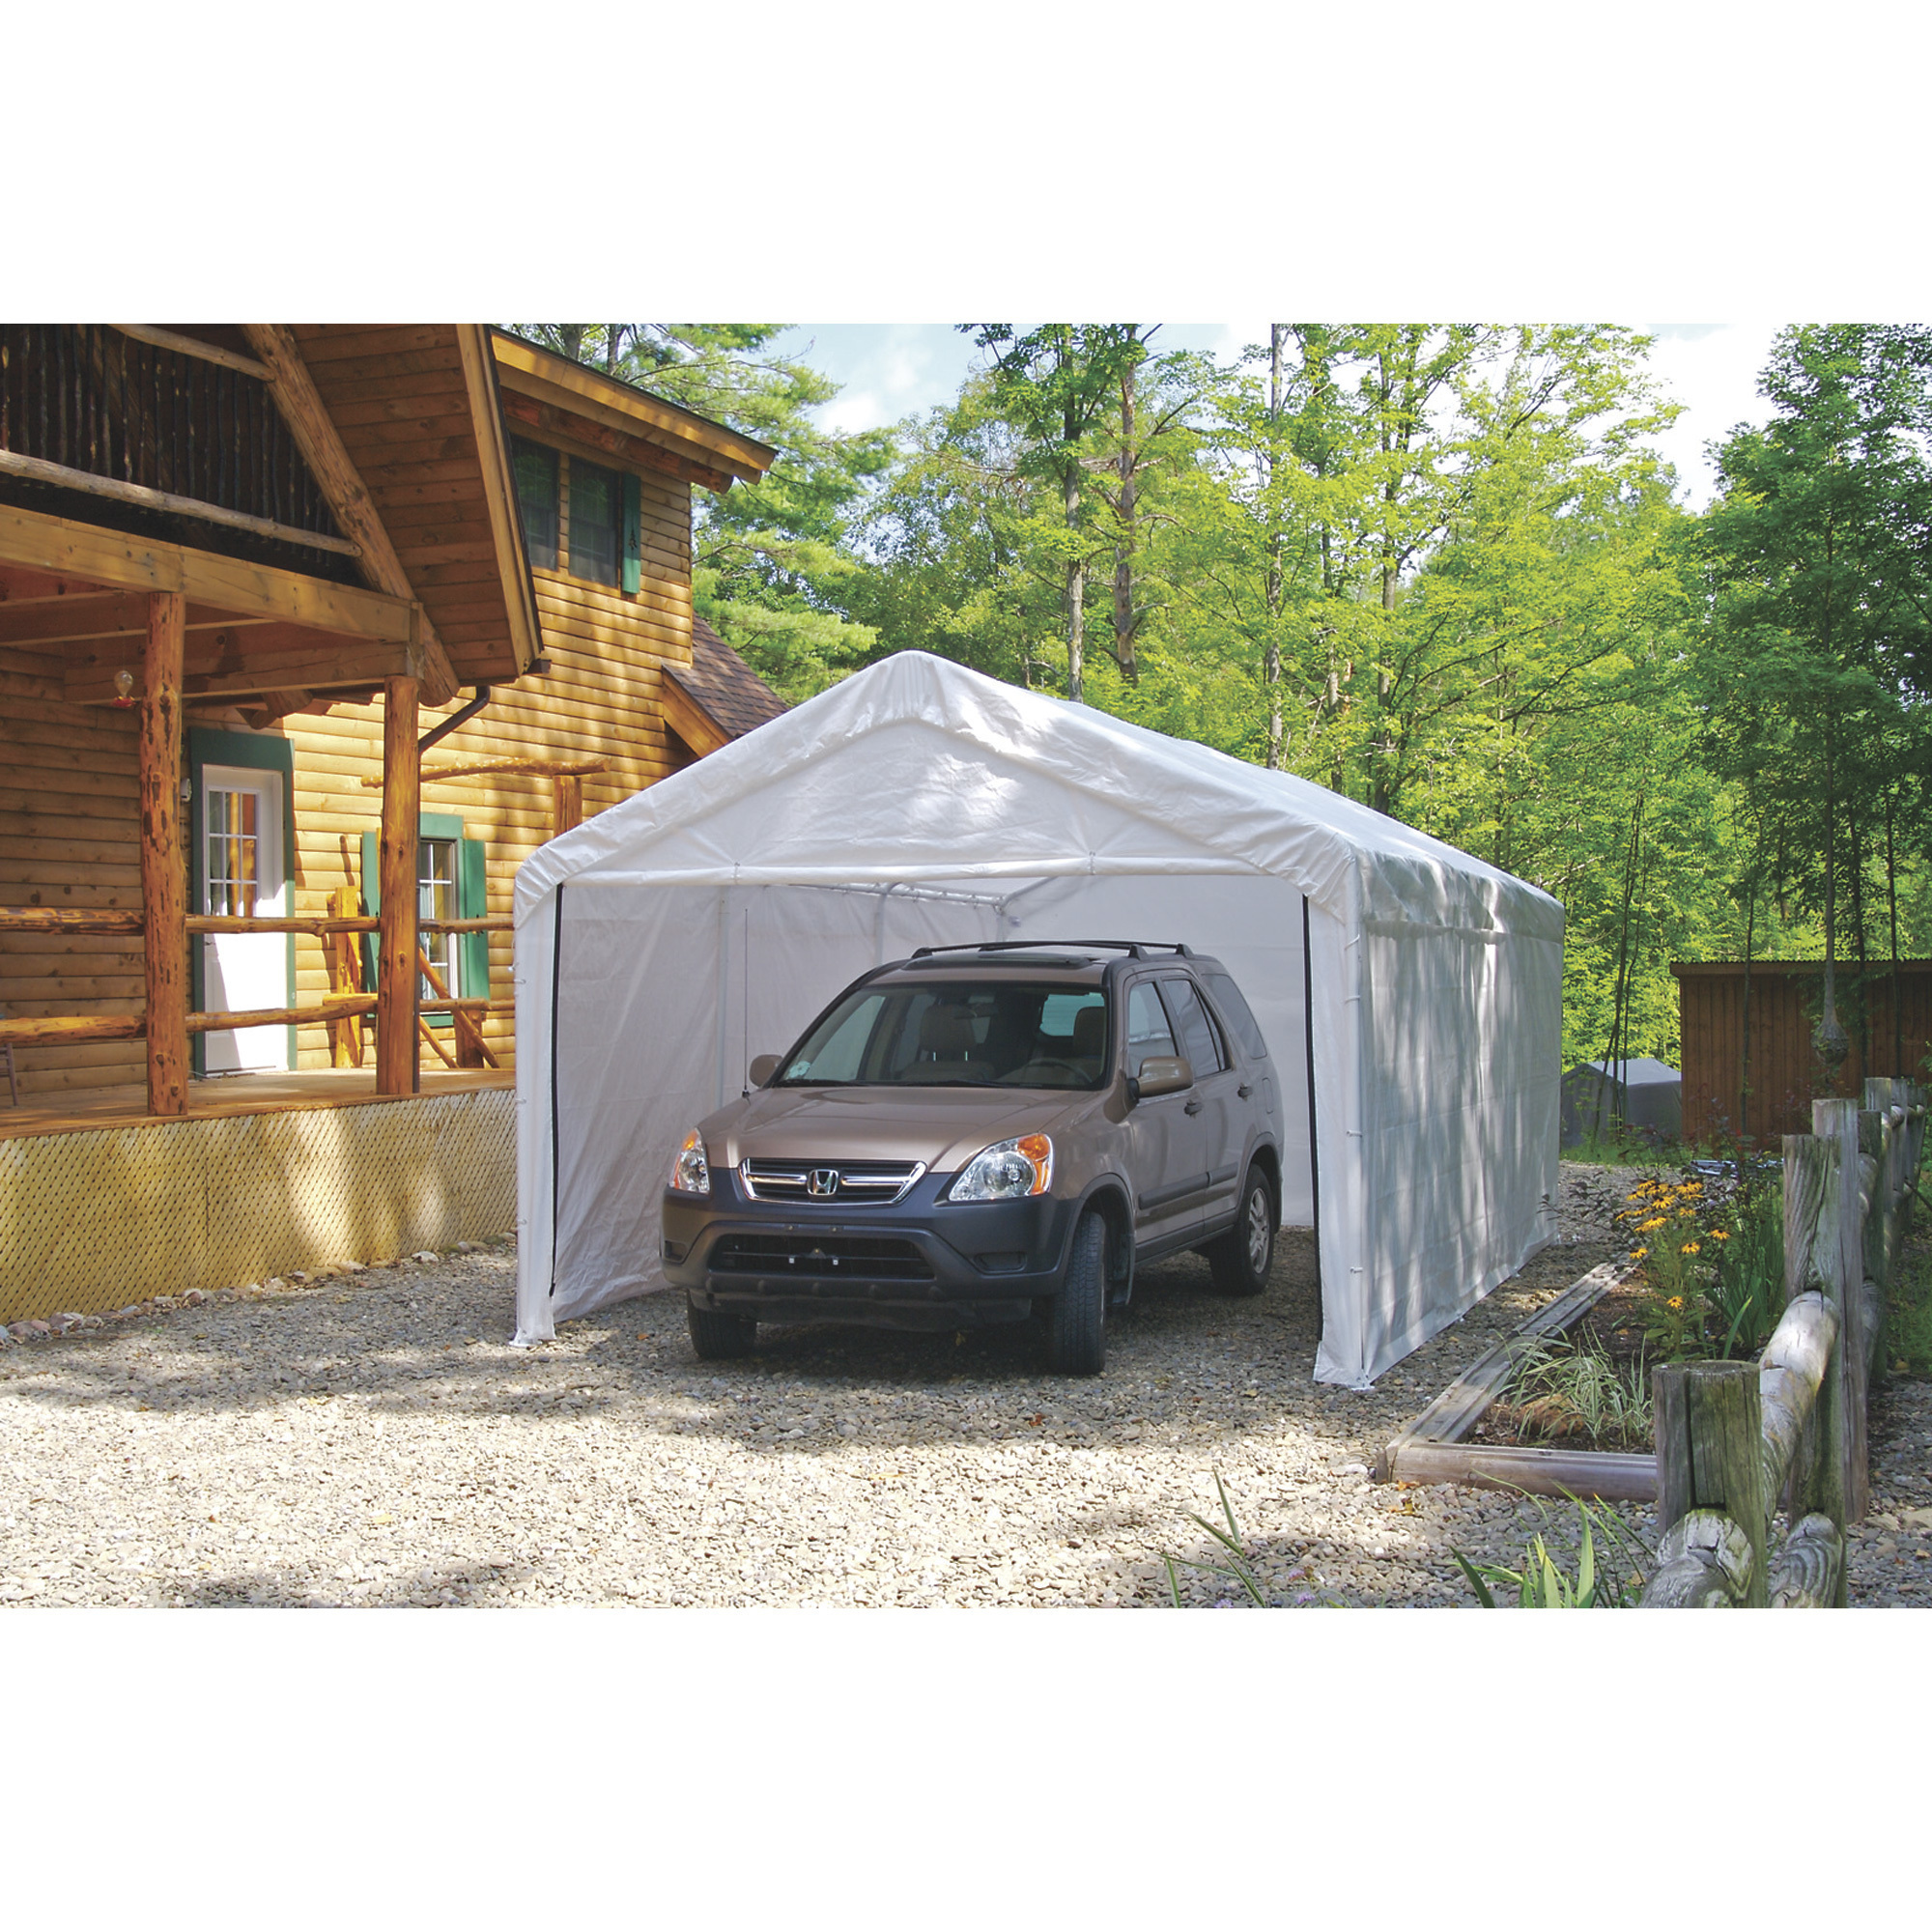 Enclosure Kit for Max AP 20ft. x 10ft. Outdoor Canopy Tent — Fits Item# 55418 and Item# 55420, Model - ShelterLogic 25775